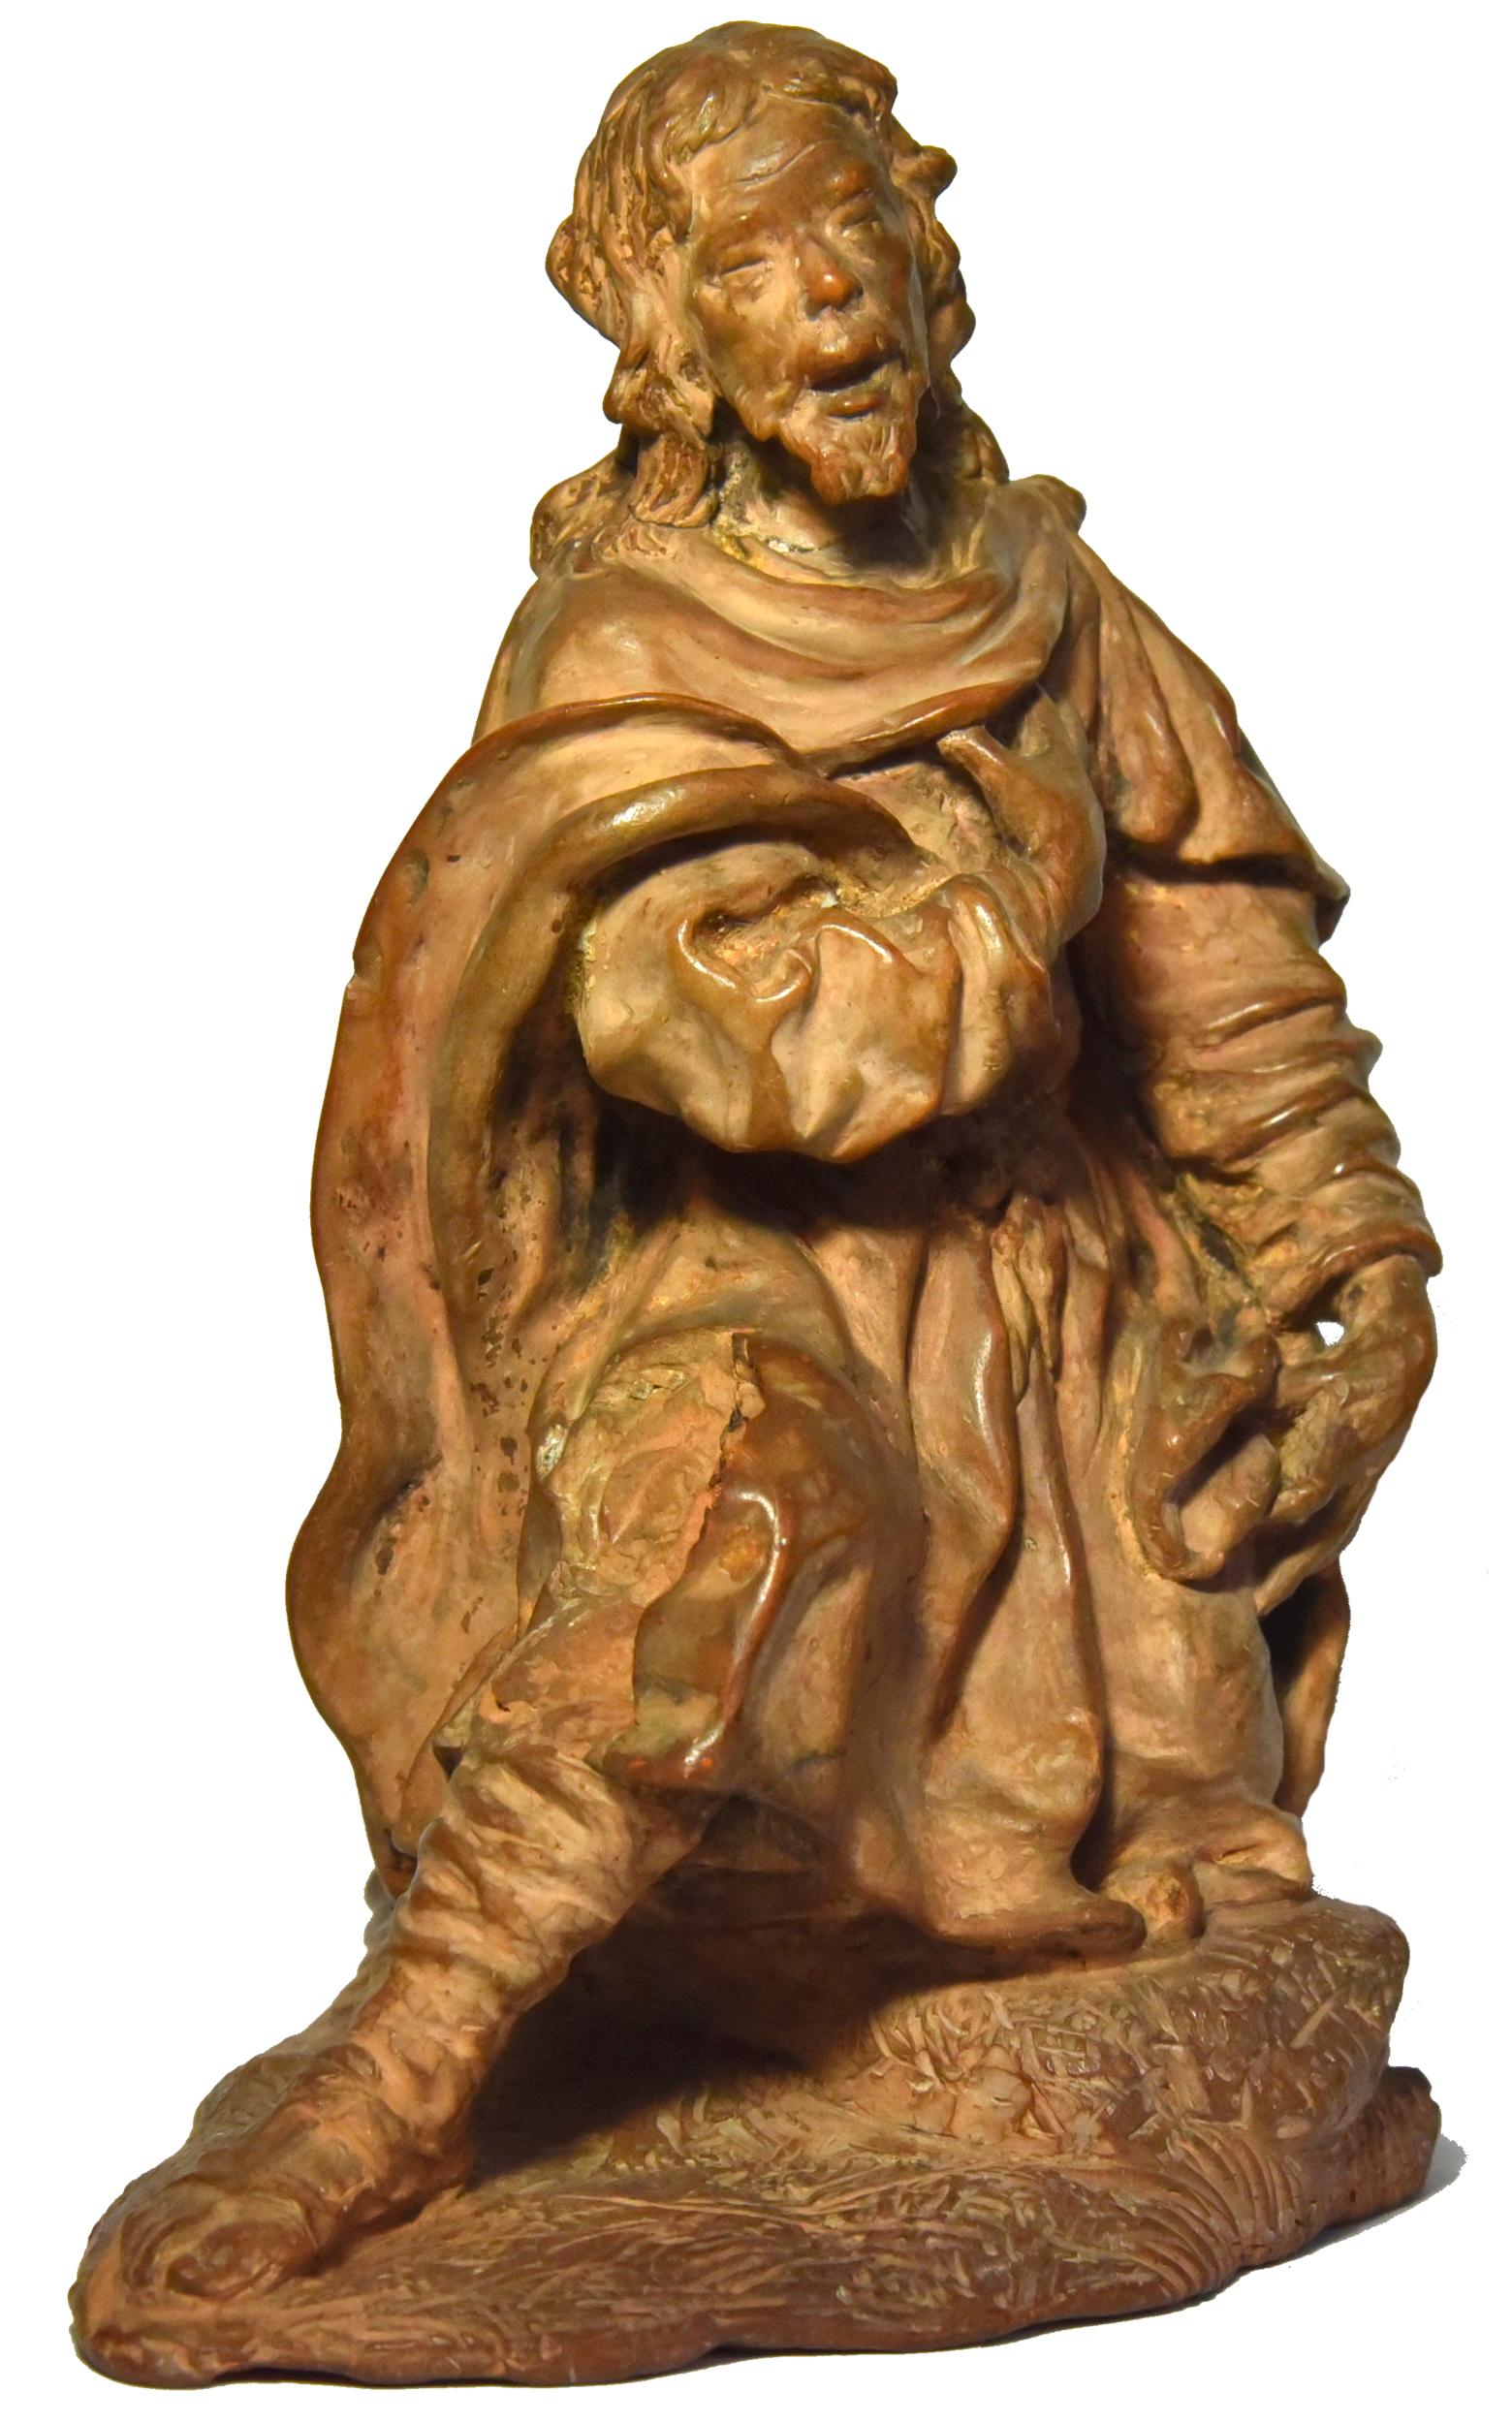 Terracotta figure of a shepherd, Italian school of the 18th century

This figure of a kneeling old man, dressed in rustic clothes, who places his hand on his heart, certainly represents a shepherd.
It may be a terracotta figure for a nativity